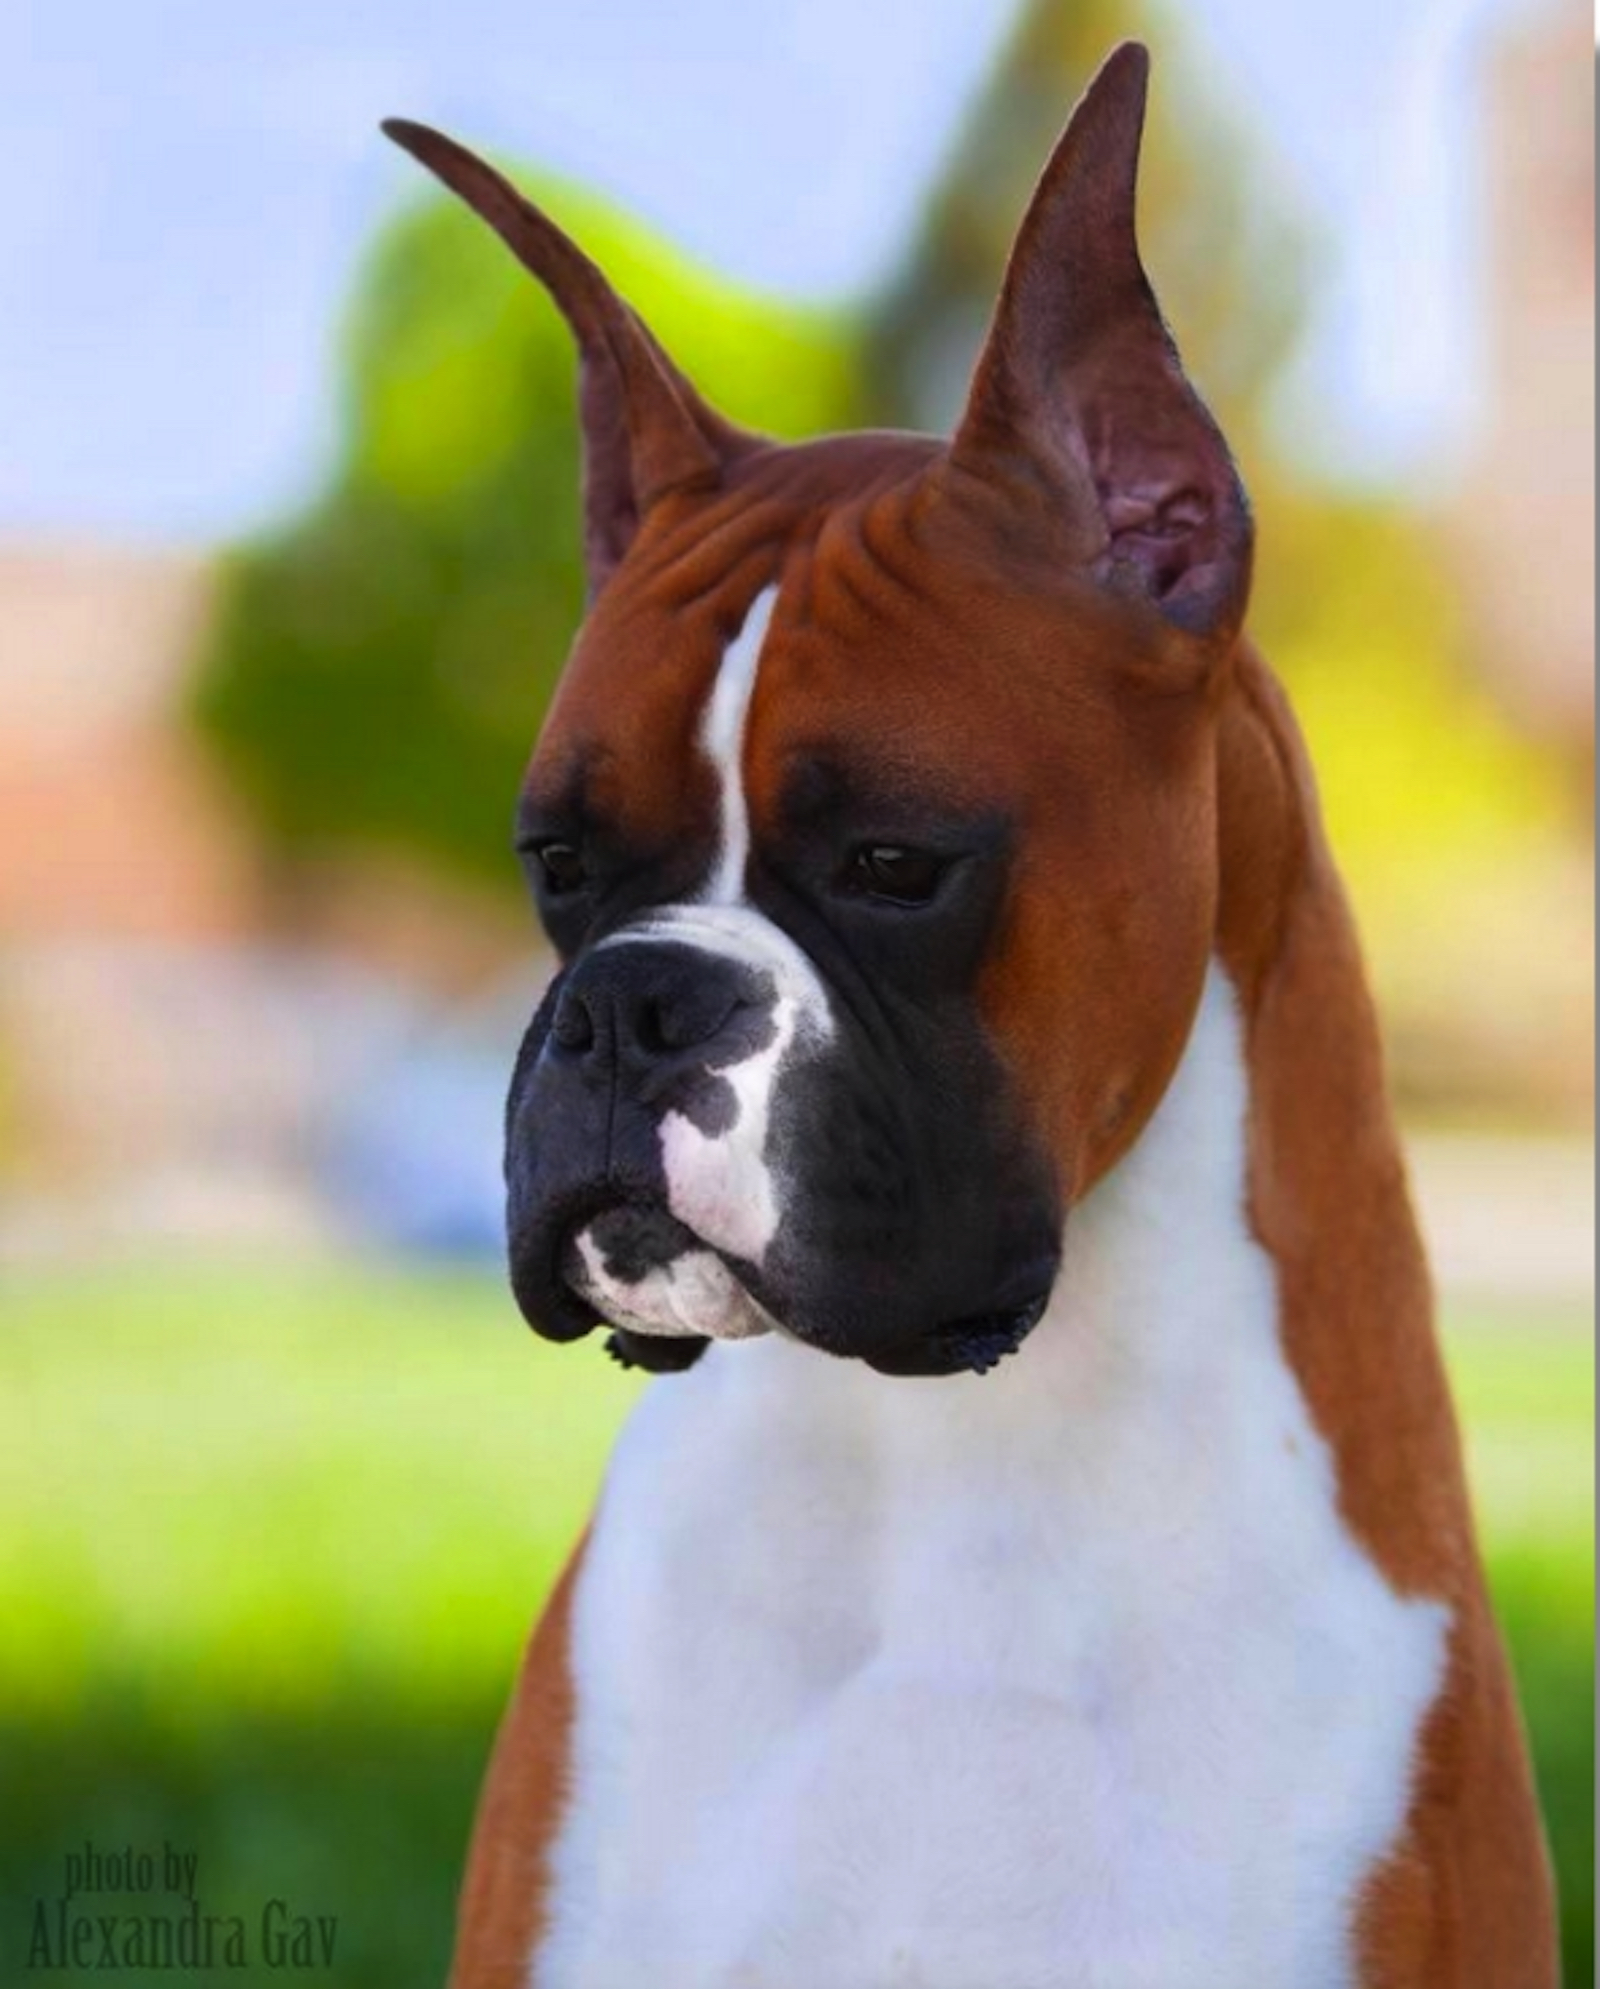 Longboat Key couple's boxer wins "Best in Breed" at Westminster Dog